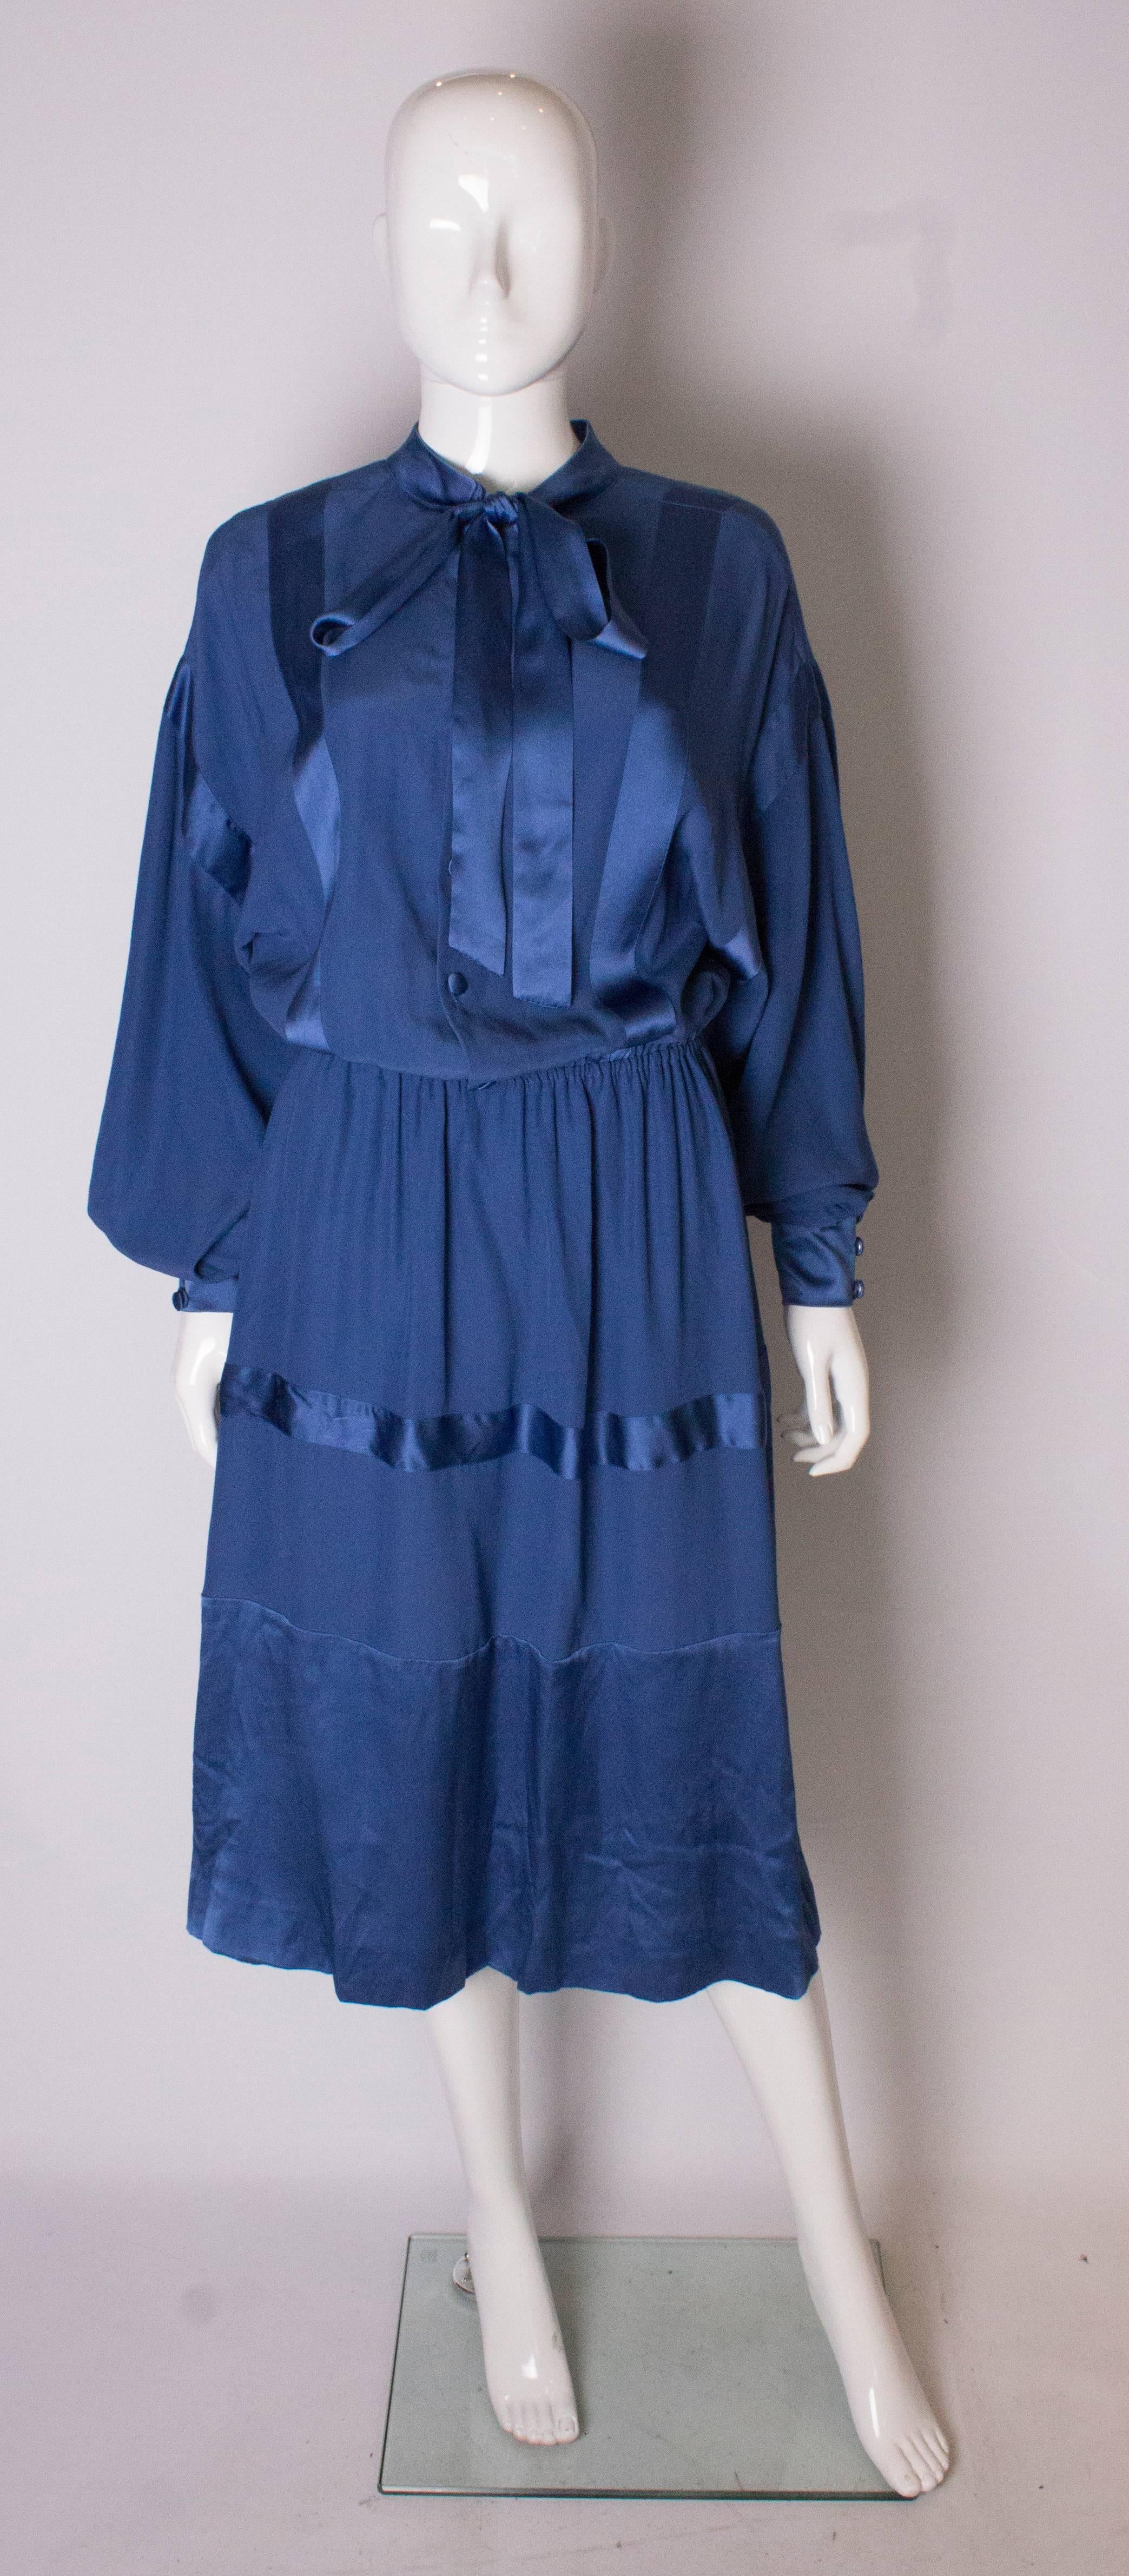 A chic  blue silk dress by Stefano Ricci for Herbie Frogg . The dress is in a blue silk with satin /ribbon panels . It  has an elastic waist, button front and tie neck.